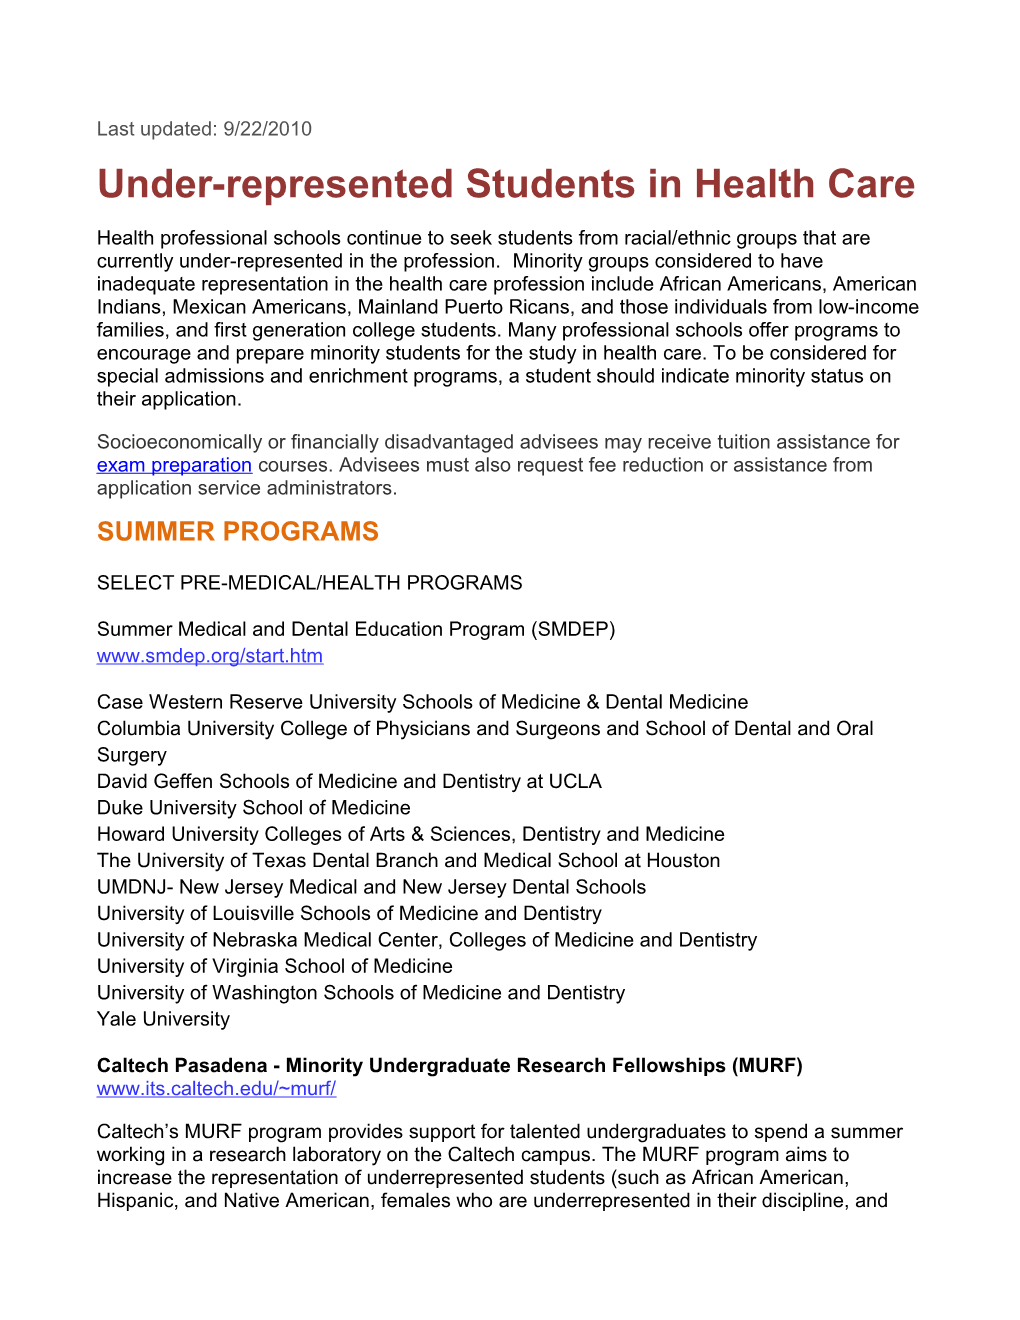 Under-Represented Students in Health Care